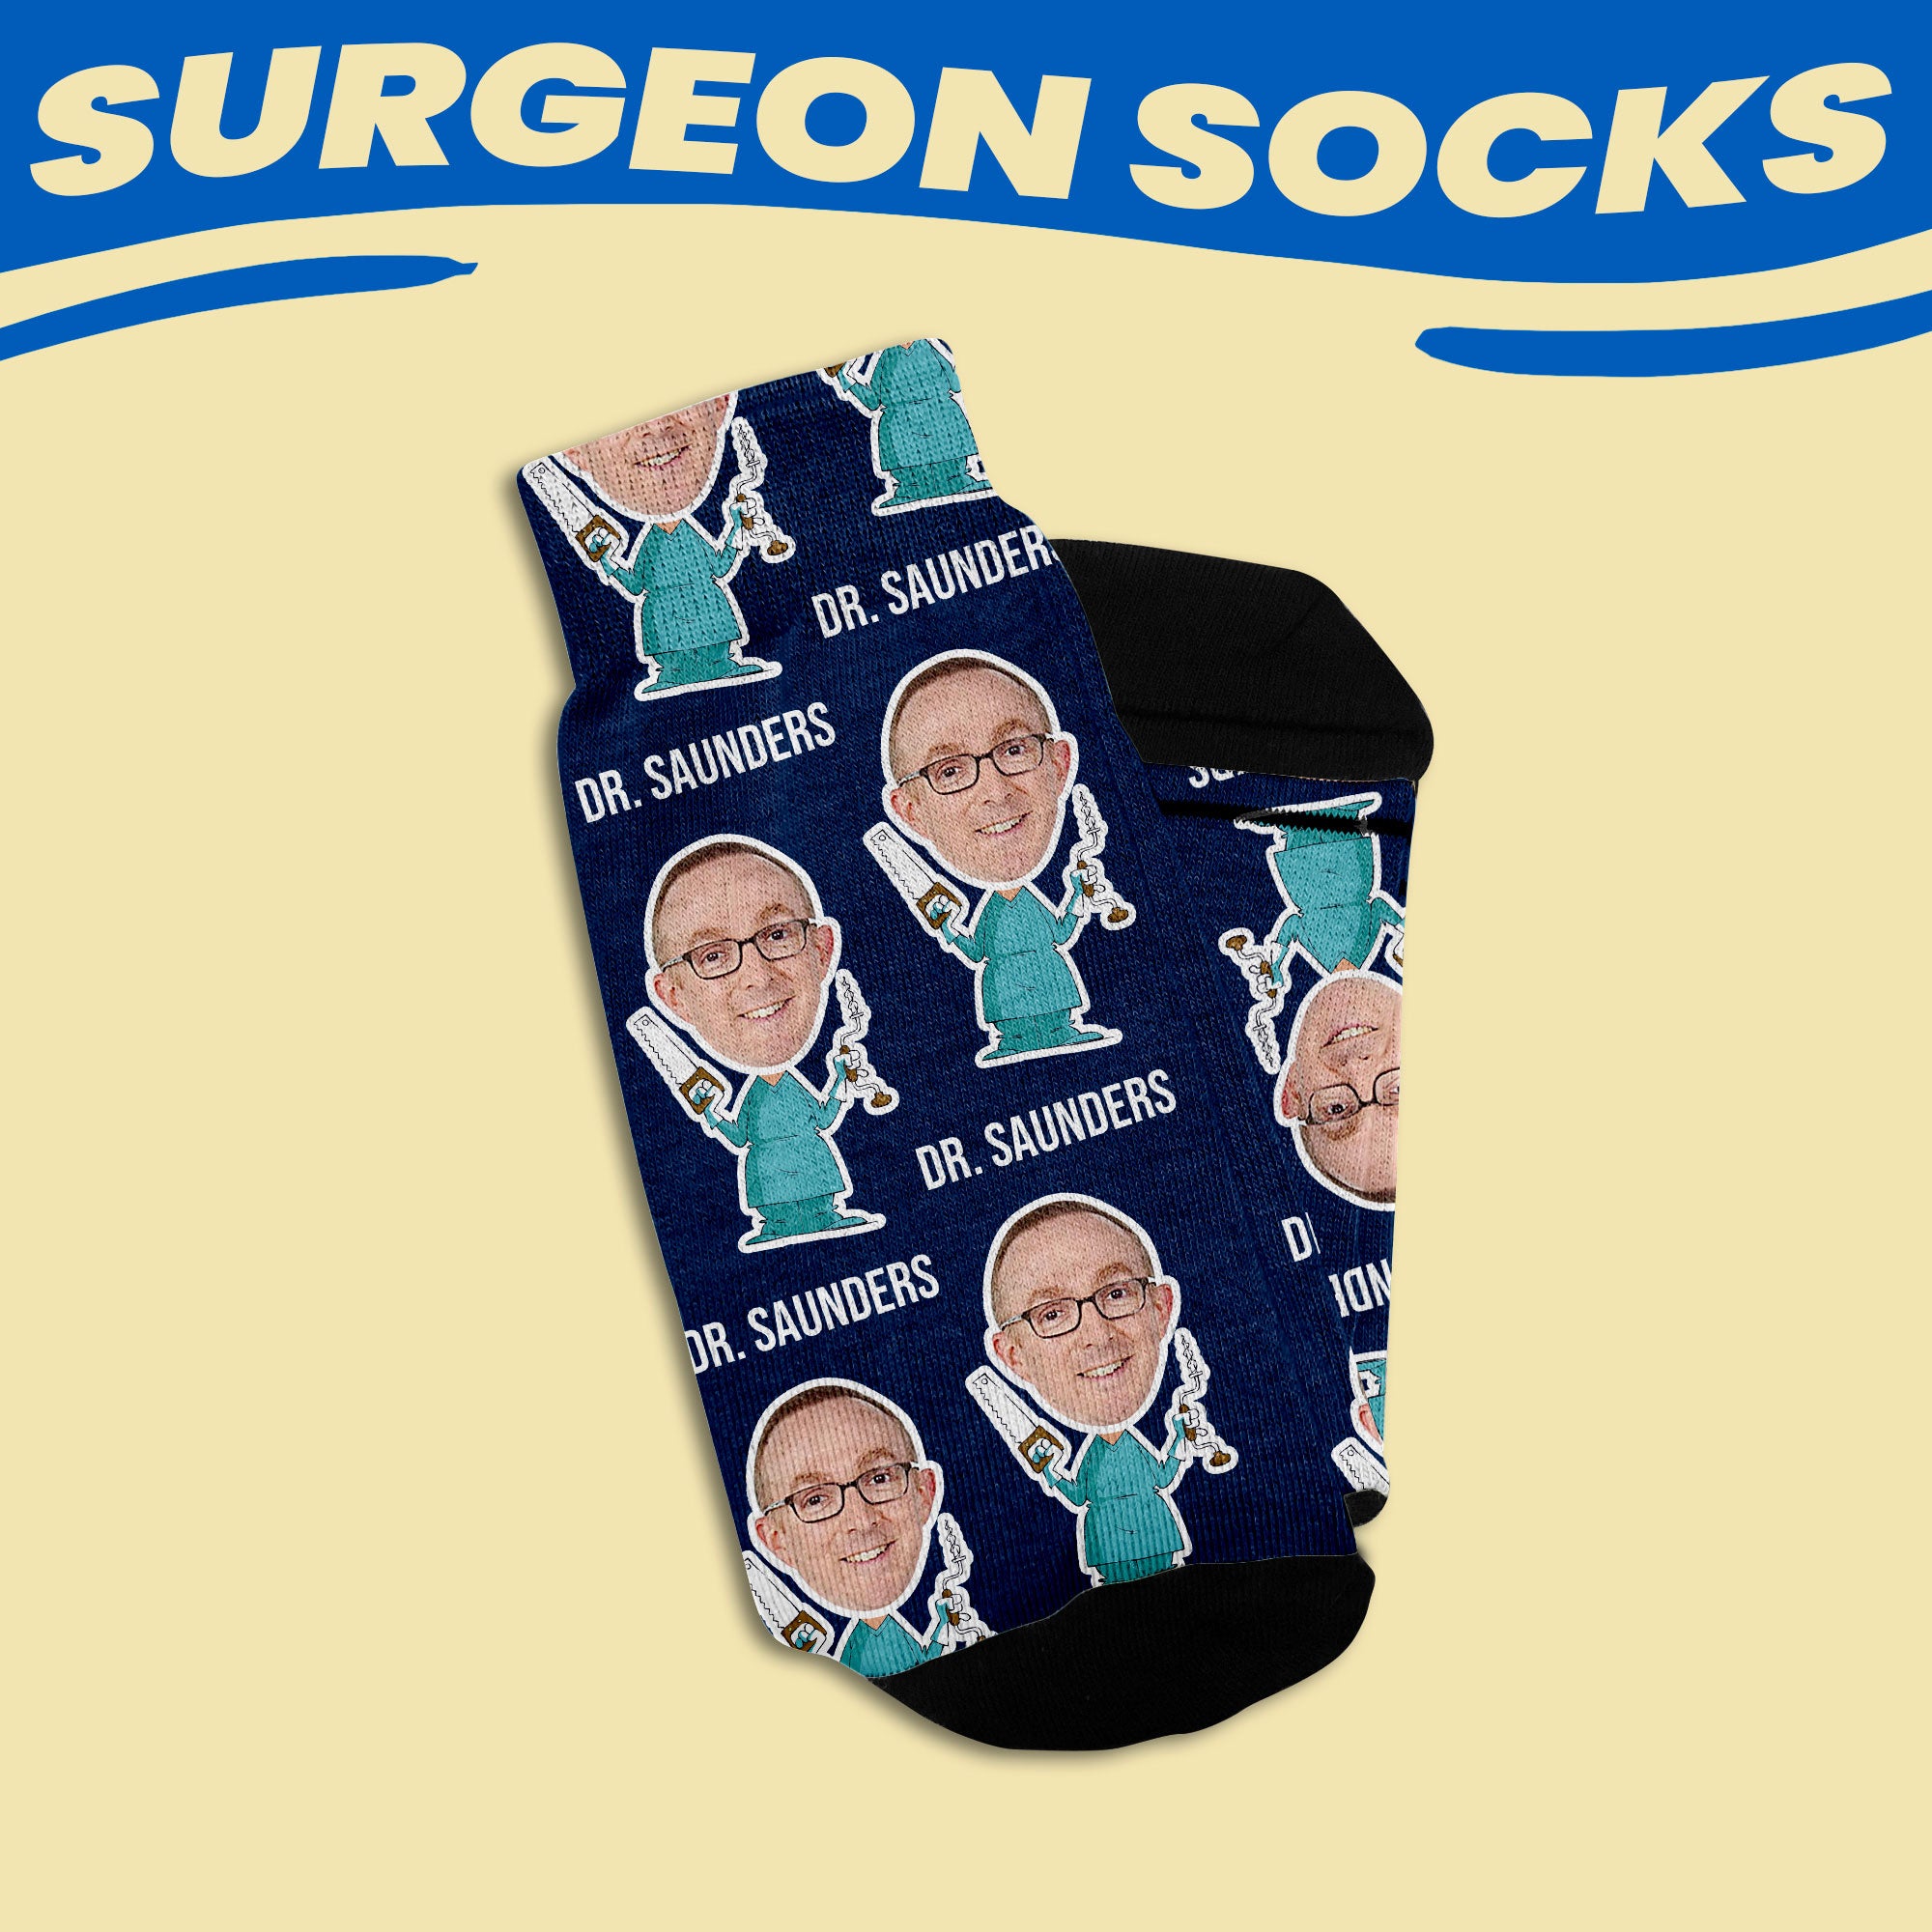 Perosnalized surgon gift socks gifts for surgeons personalized custom socks dad boss coworker colleague 4